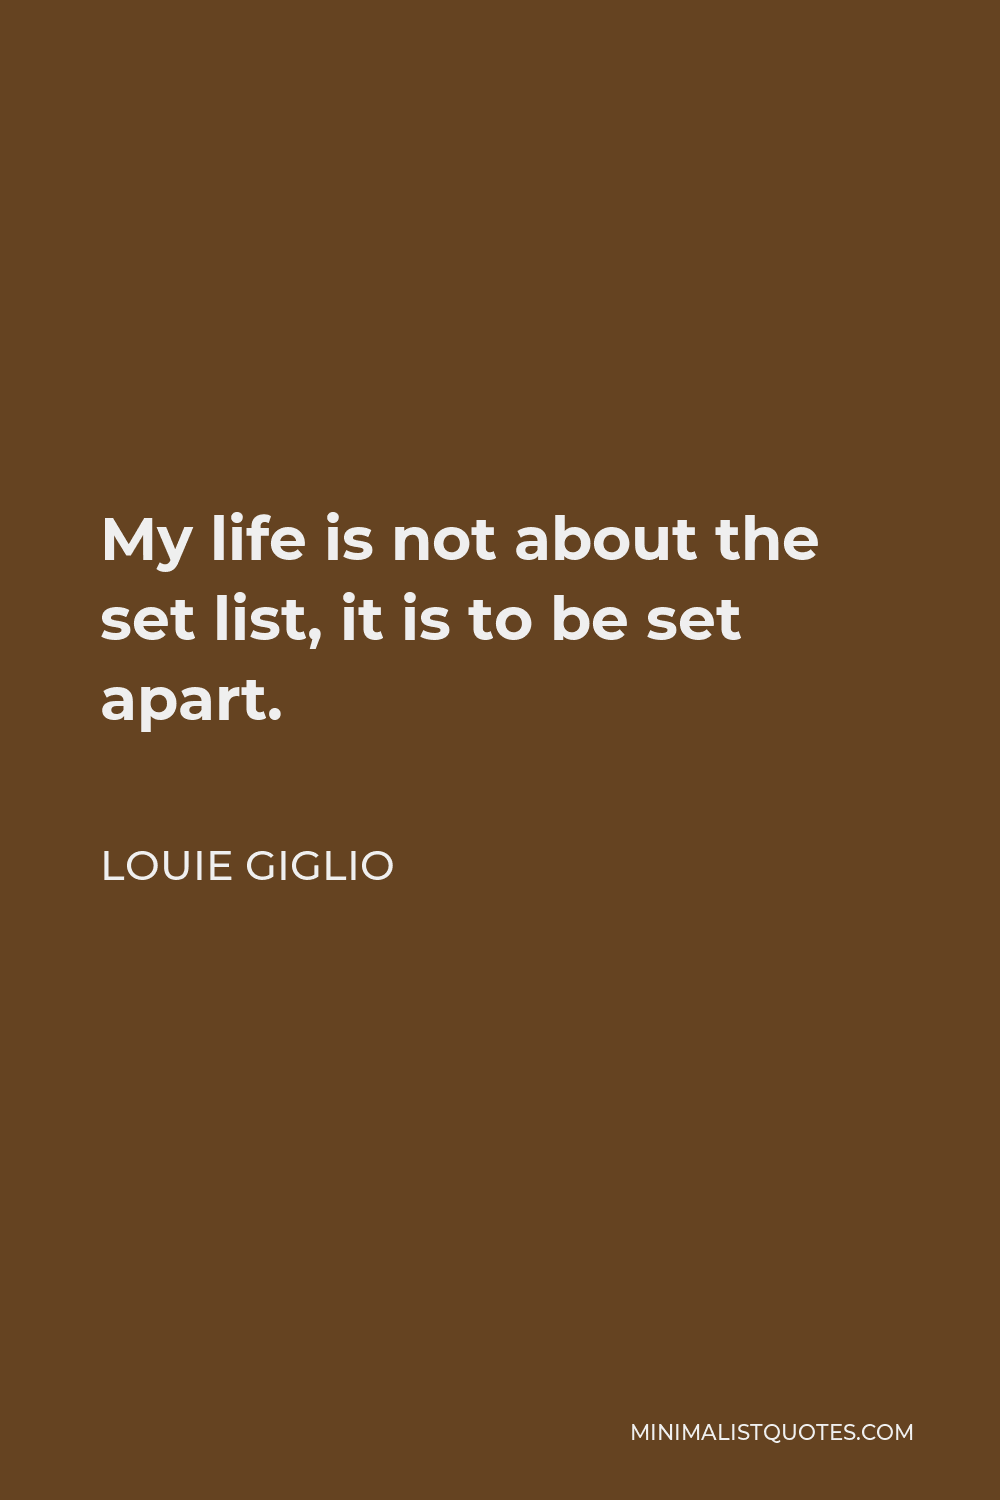 Louie Giglio Quote - My life is not about the set list, it is to be set apart.